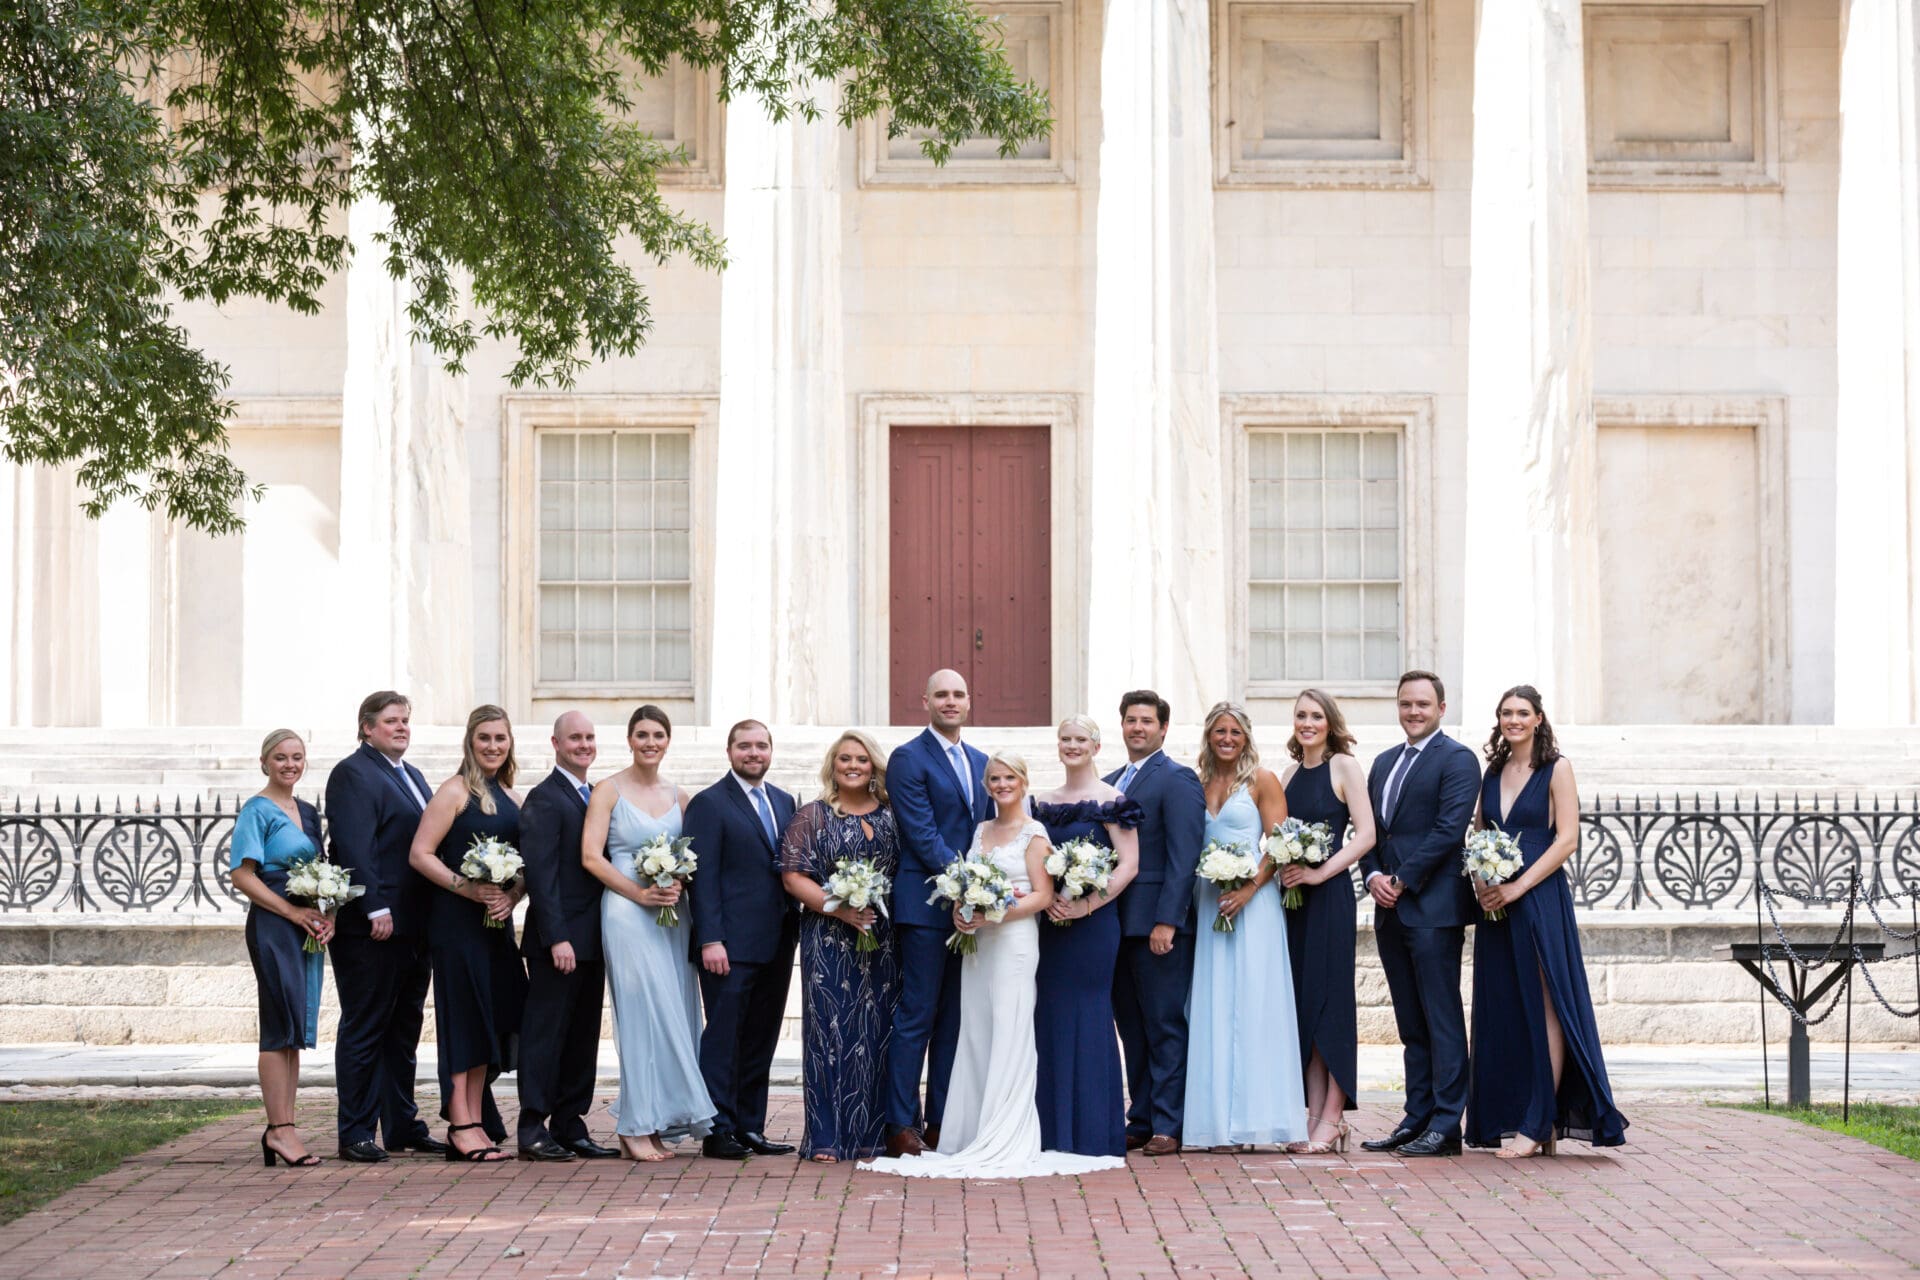 And bride and groom and their wedding party posing in front of the Second National Bank of the United States in Old City Philadelphia